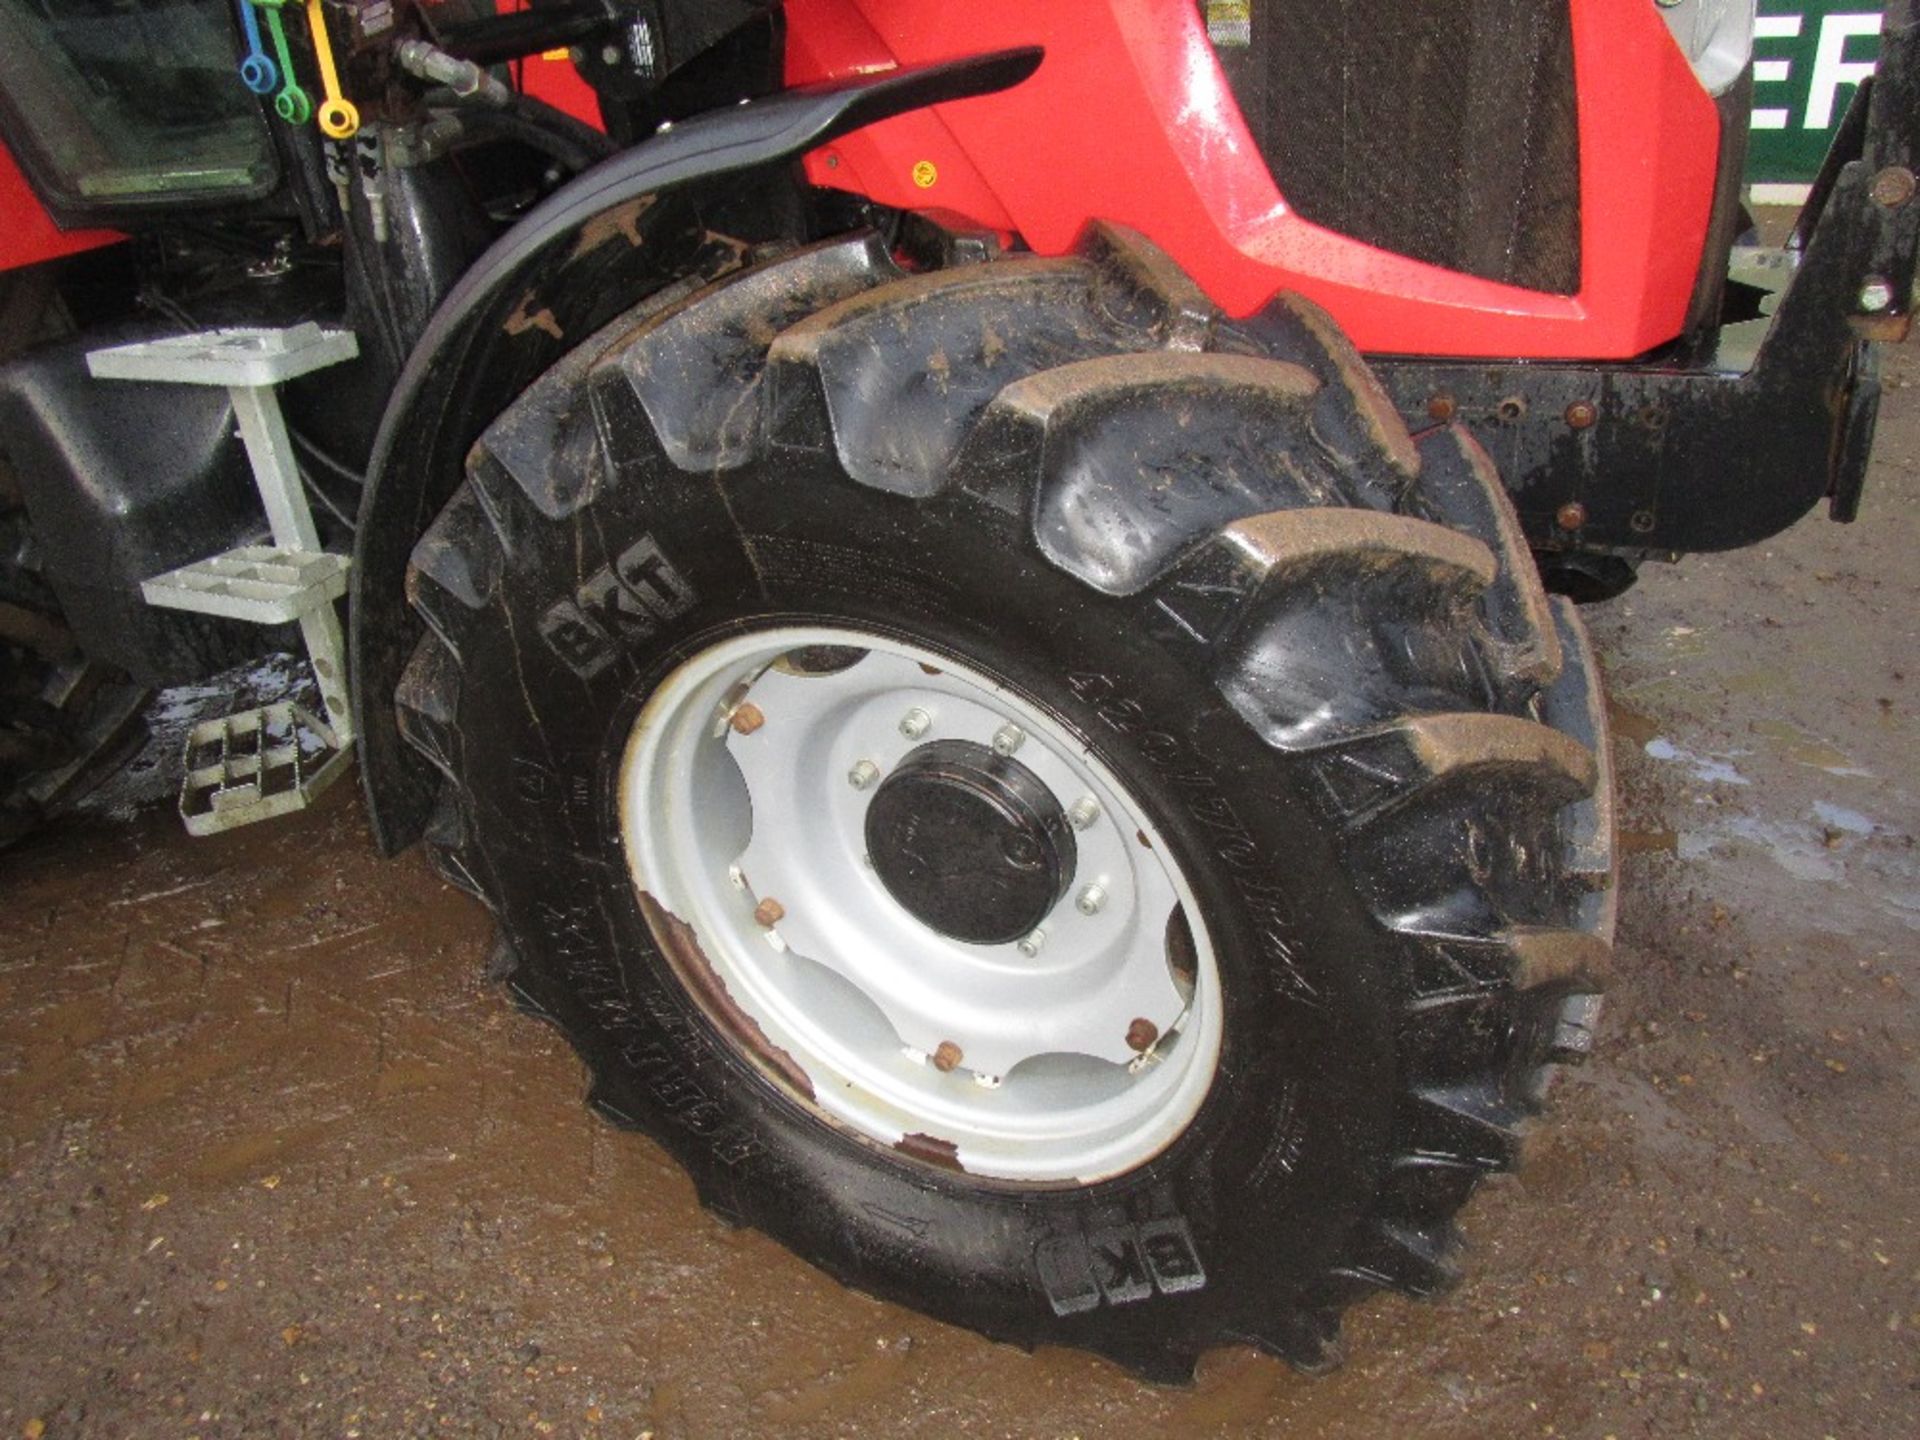 Zetor Forterra 125 4wd Tractor. 260 Trac Lift Loader. Reg Docs will be supplied. Reg. No. AE12 BKN. - Image 5 of 15